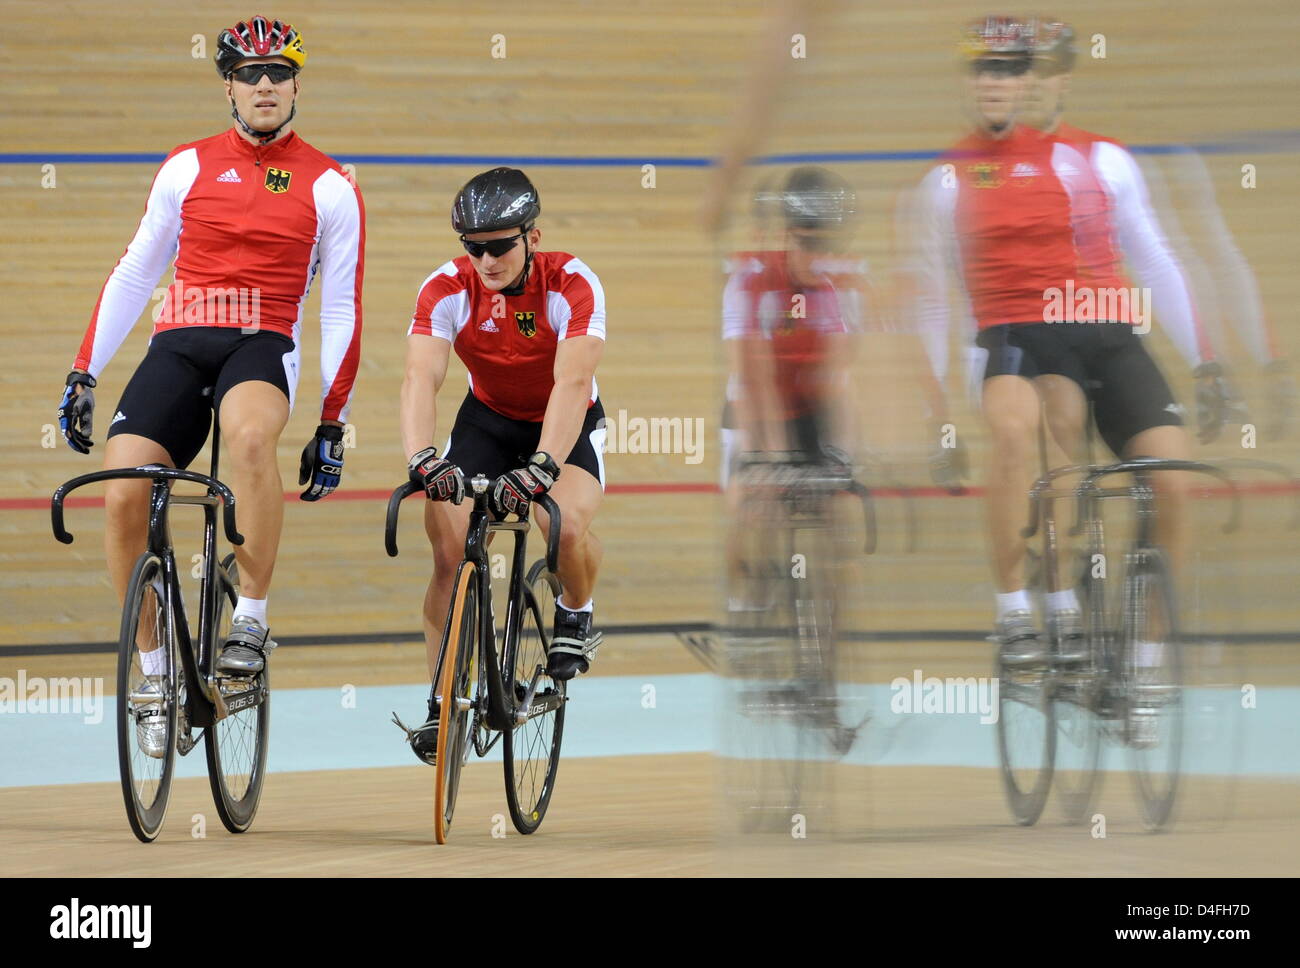 Maximilian Levy (L) and Rene Enders of the German track cycling team trains in the Laoshan Velodrome in preparation of the Beijing 2008 Olympic Games, Beijing, China, 7 August 2008. Photo: Peer Grimm (c) dpa - Bildfunk Stock Photo